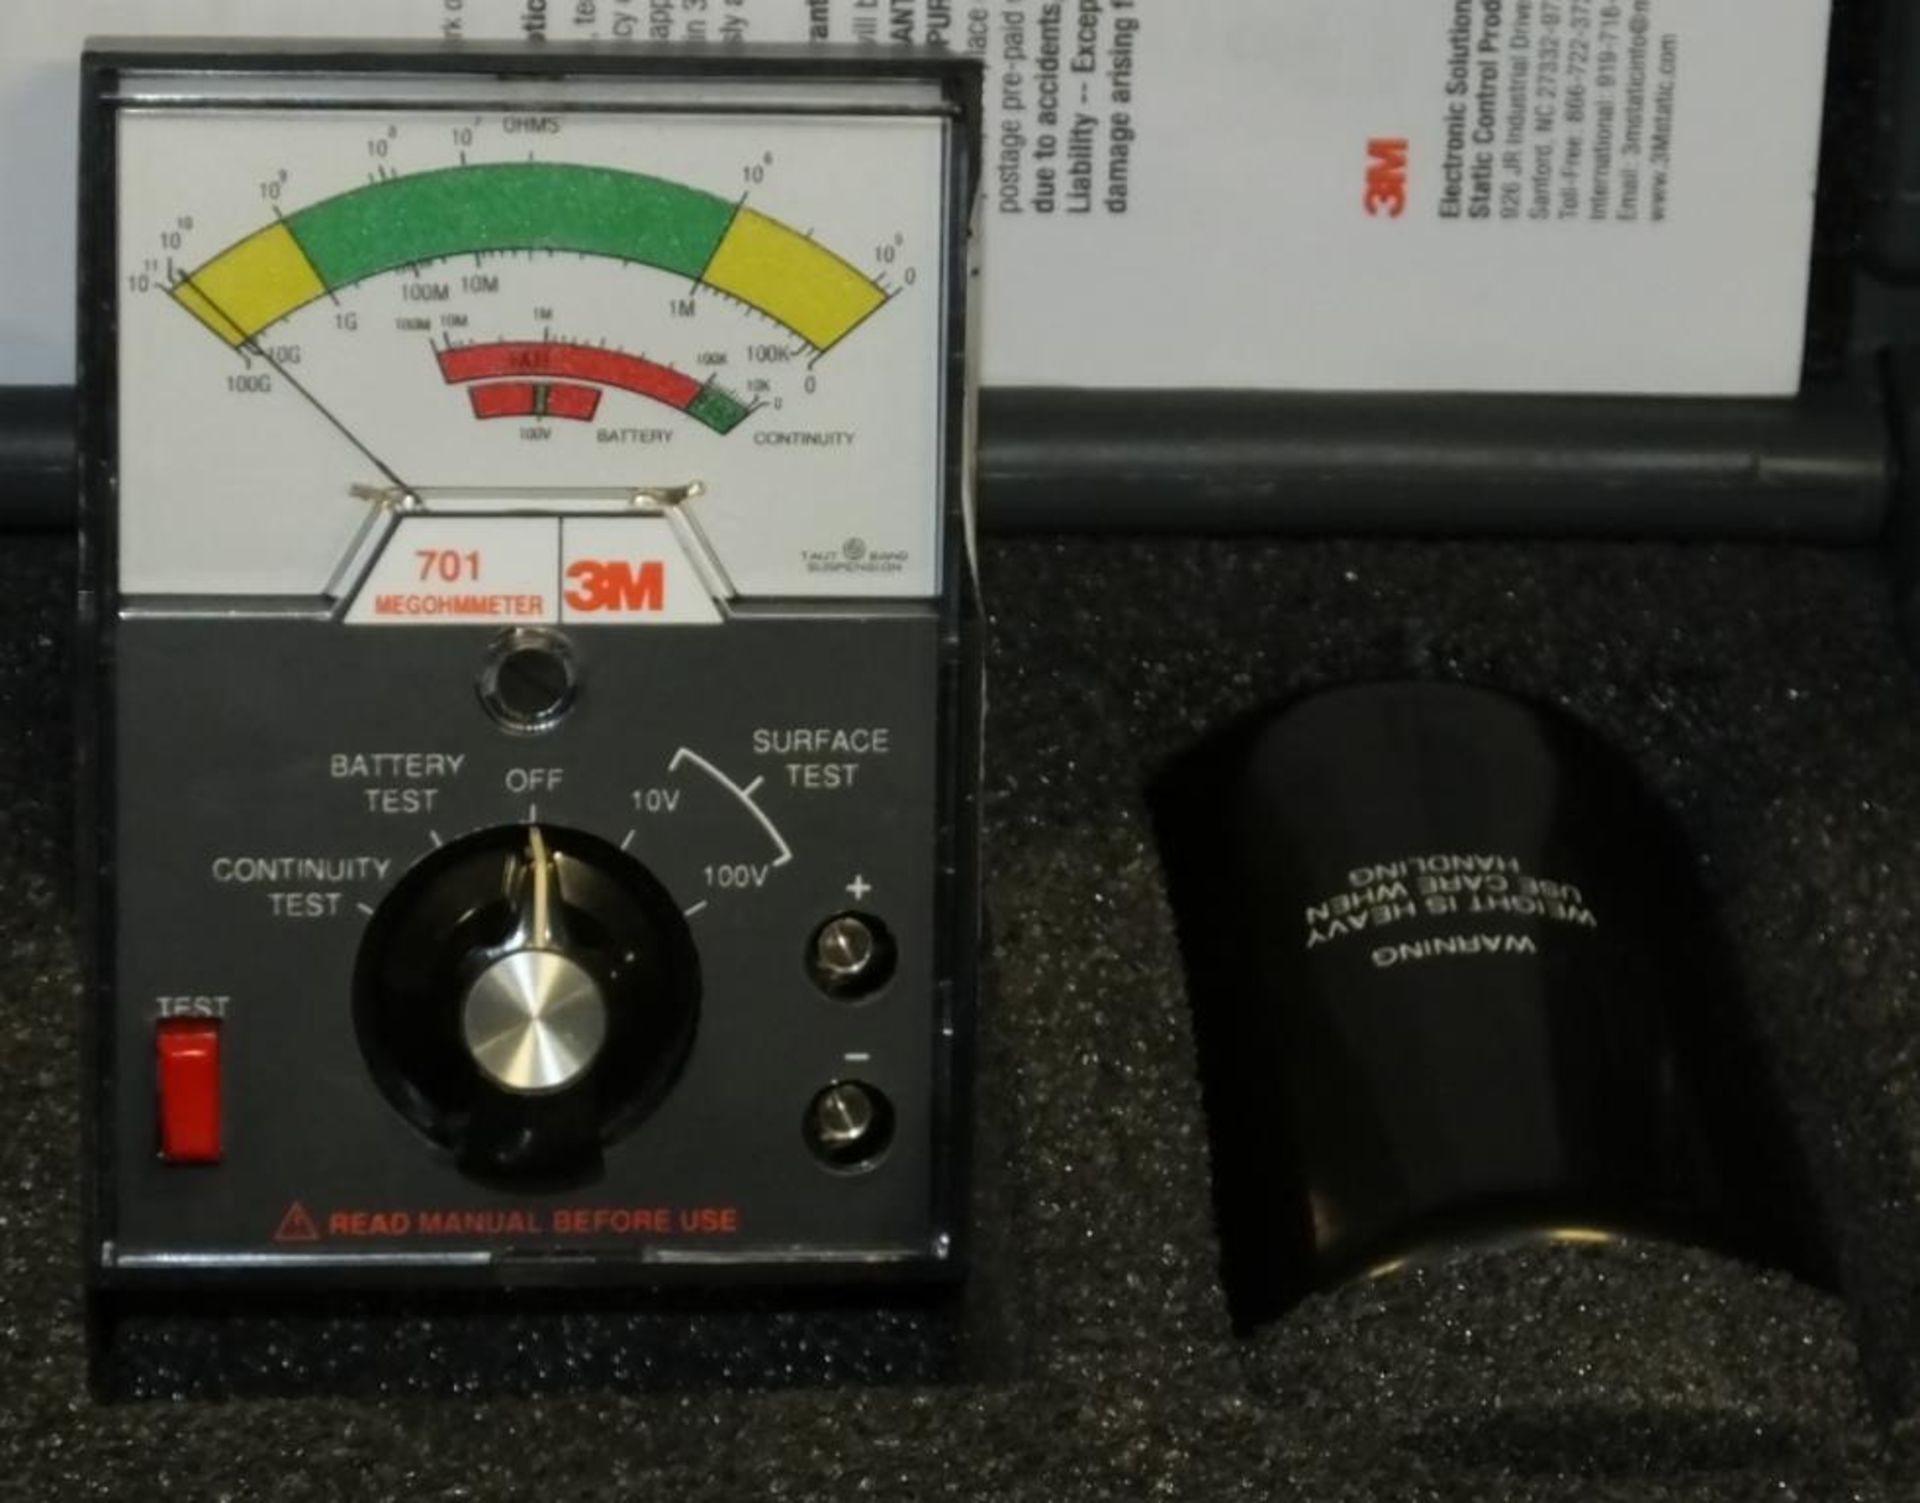 3M 701 Test Kit for Static Control Surfaces - Image 2 of 2